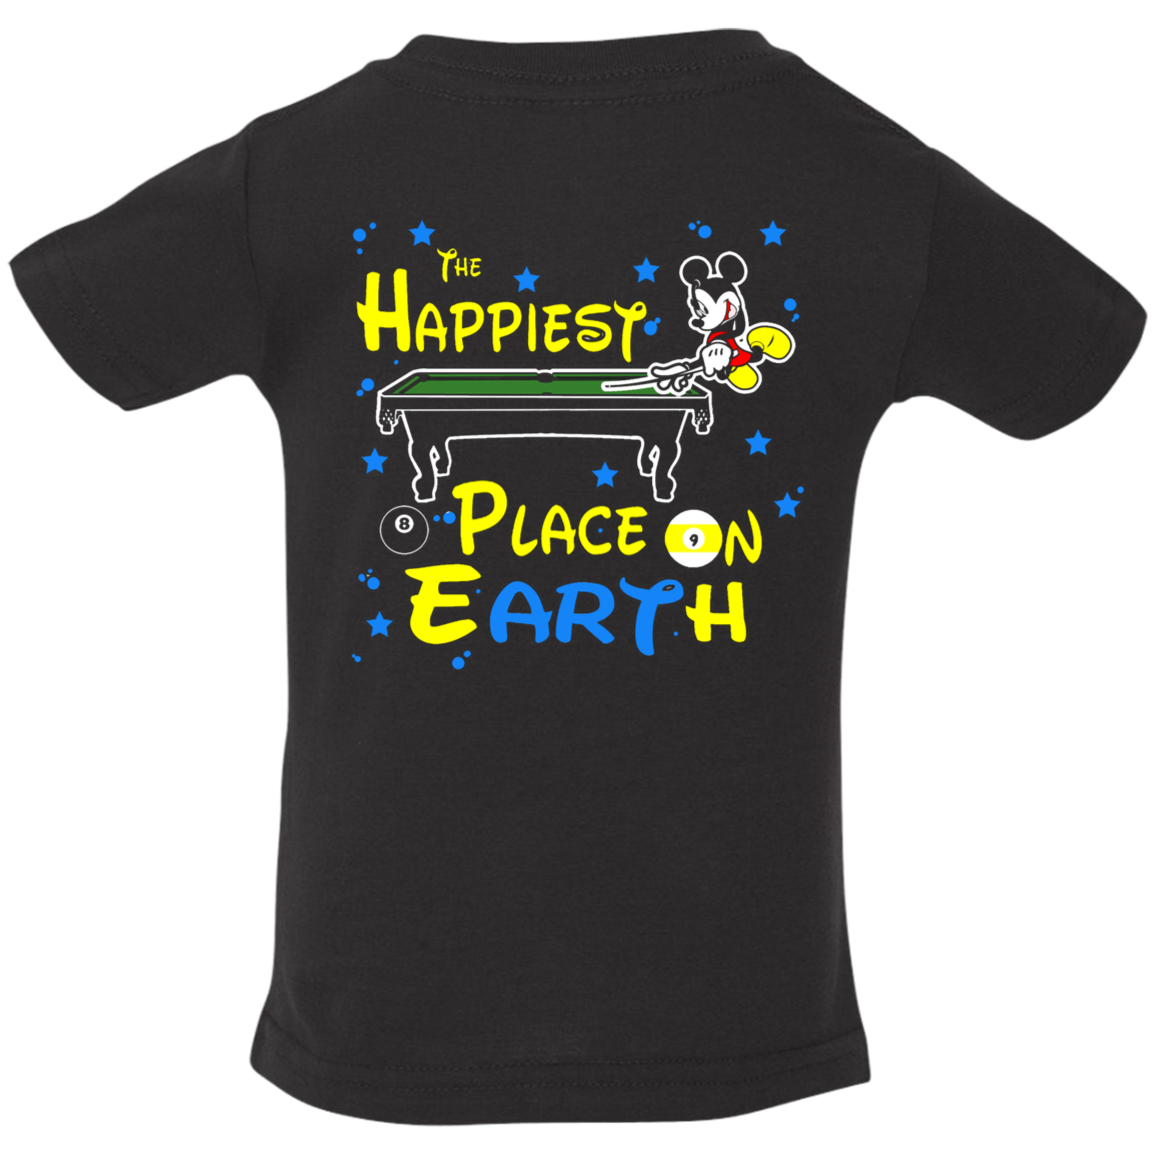 The GHOATS custom design #14. The Happiest Place On Earth. Fan Art. Infant Jersey T-Shirt